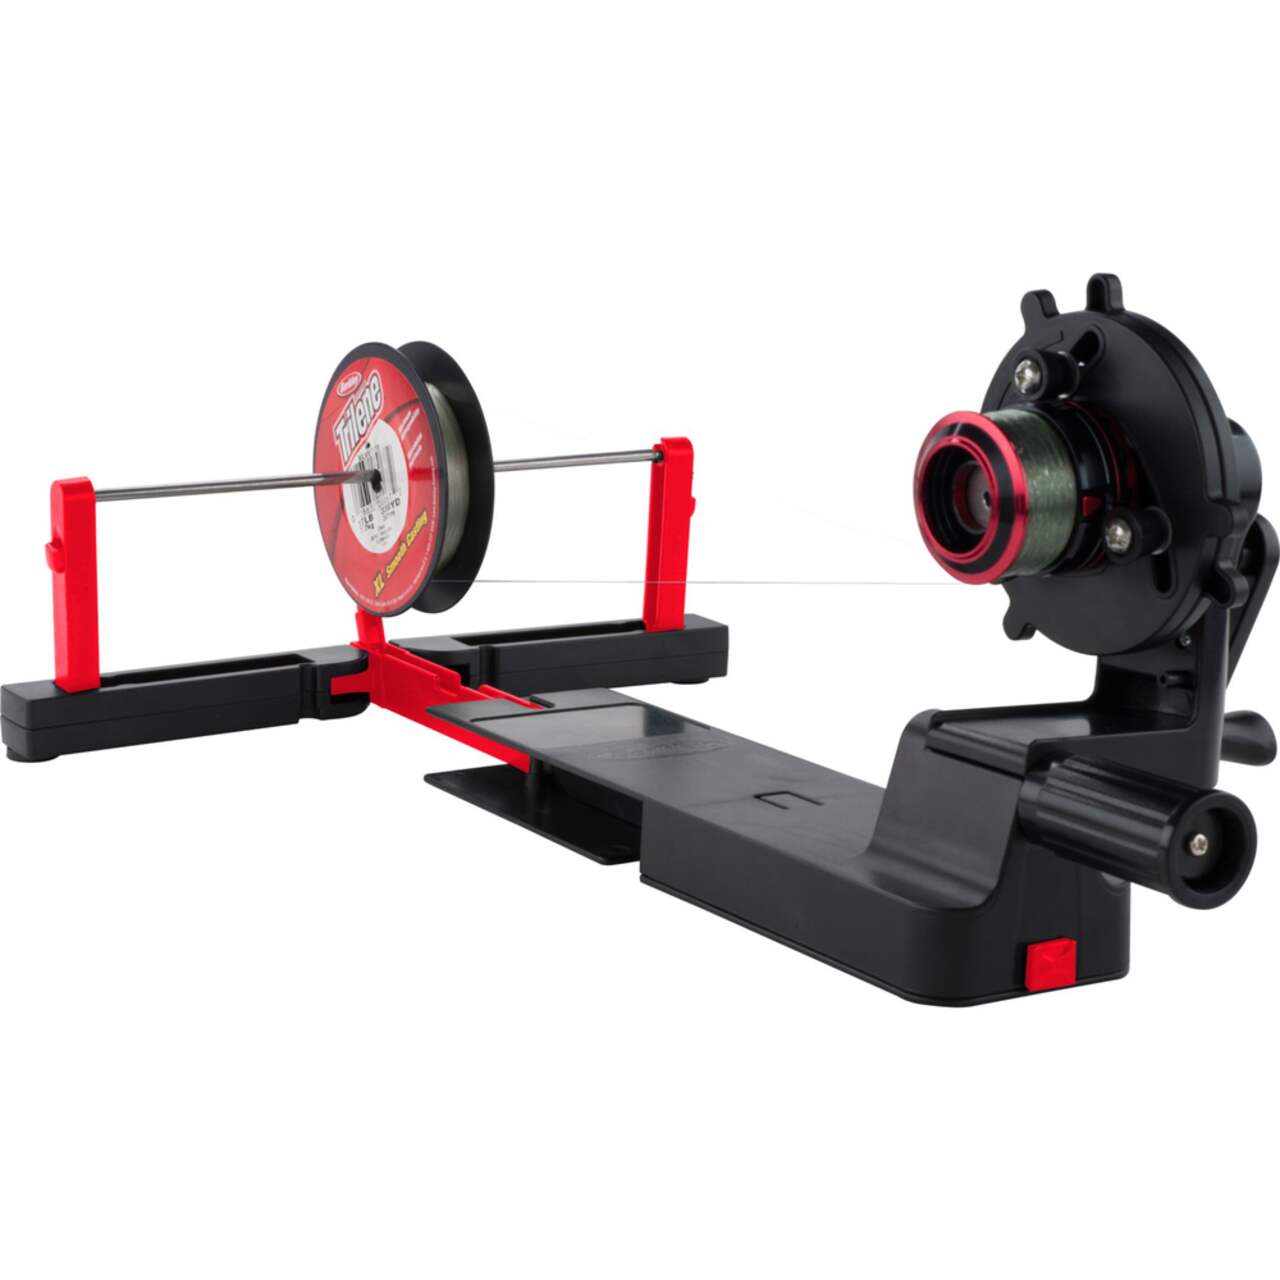 Berkley Portable Line Spooling Station Review - video Dailymotion